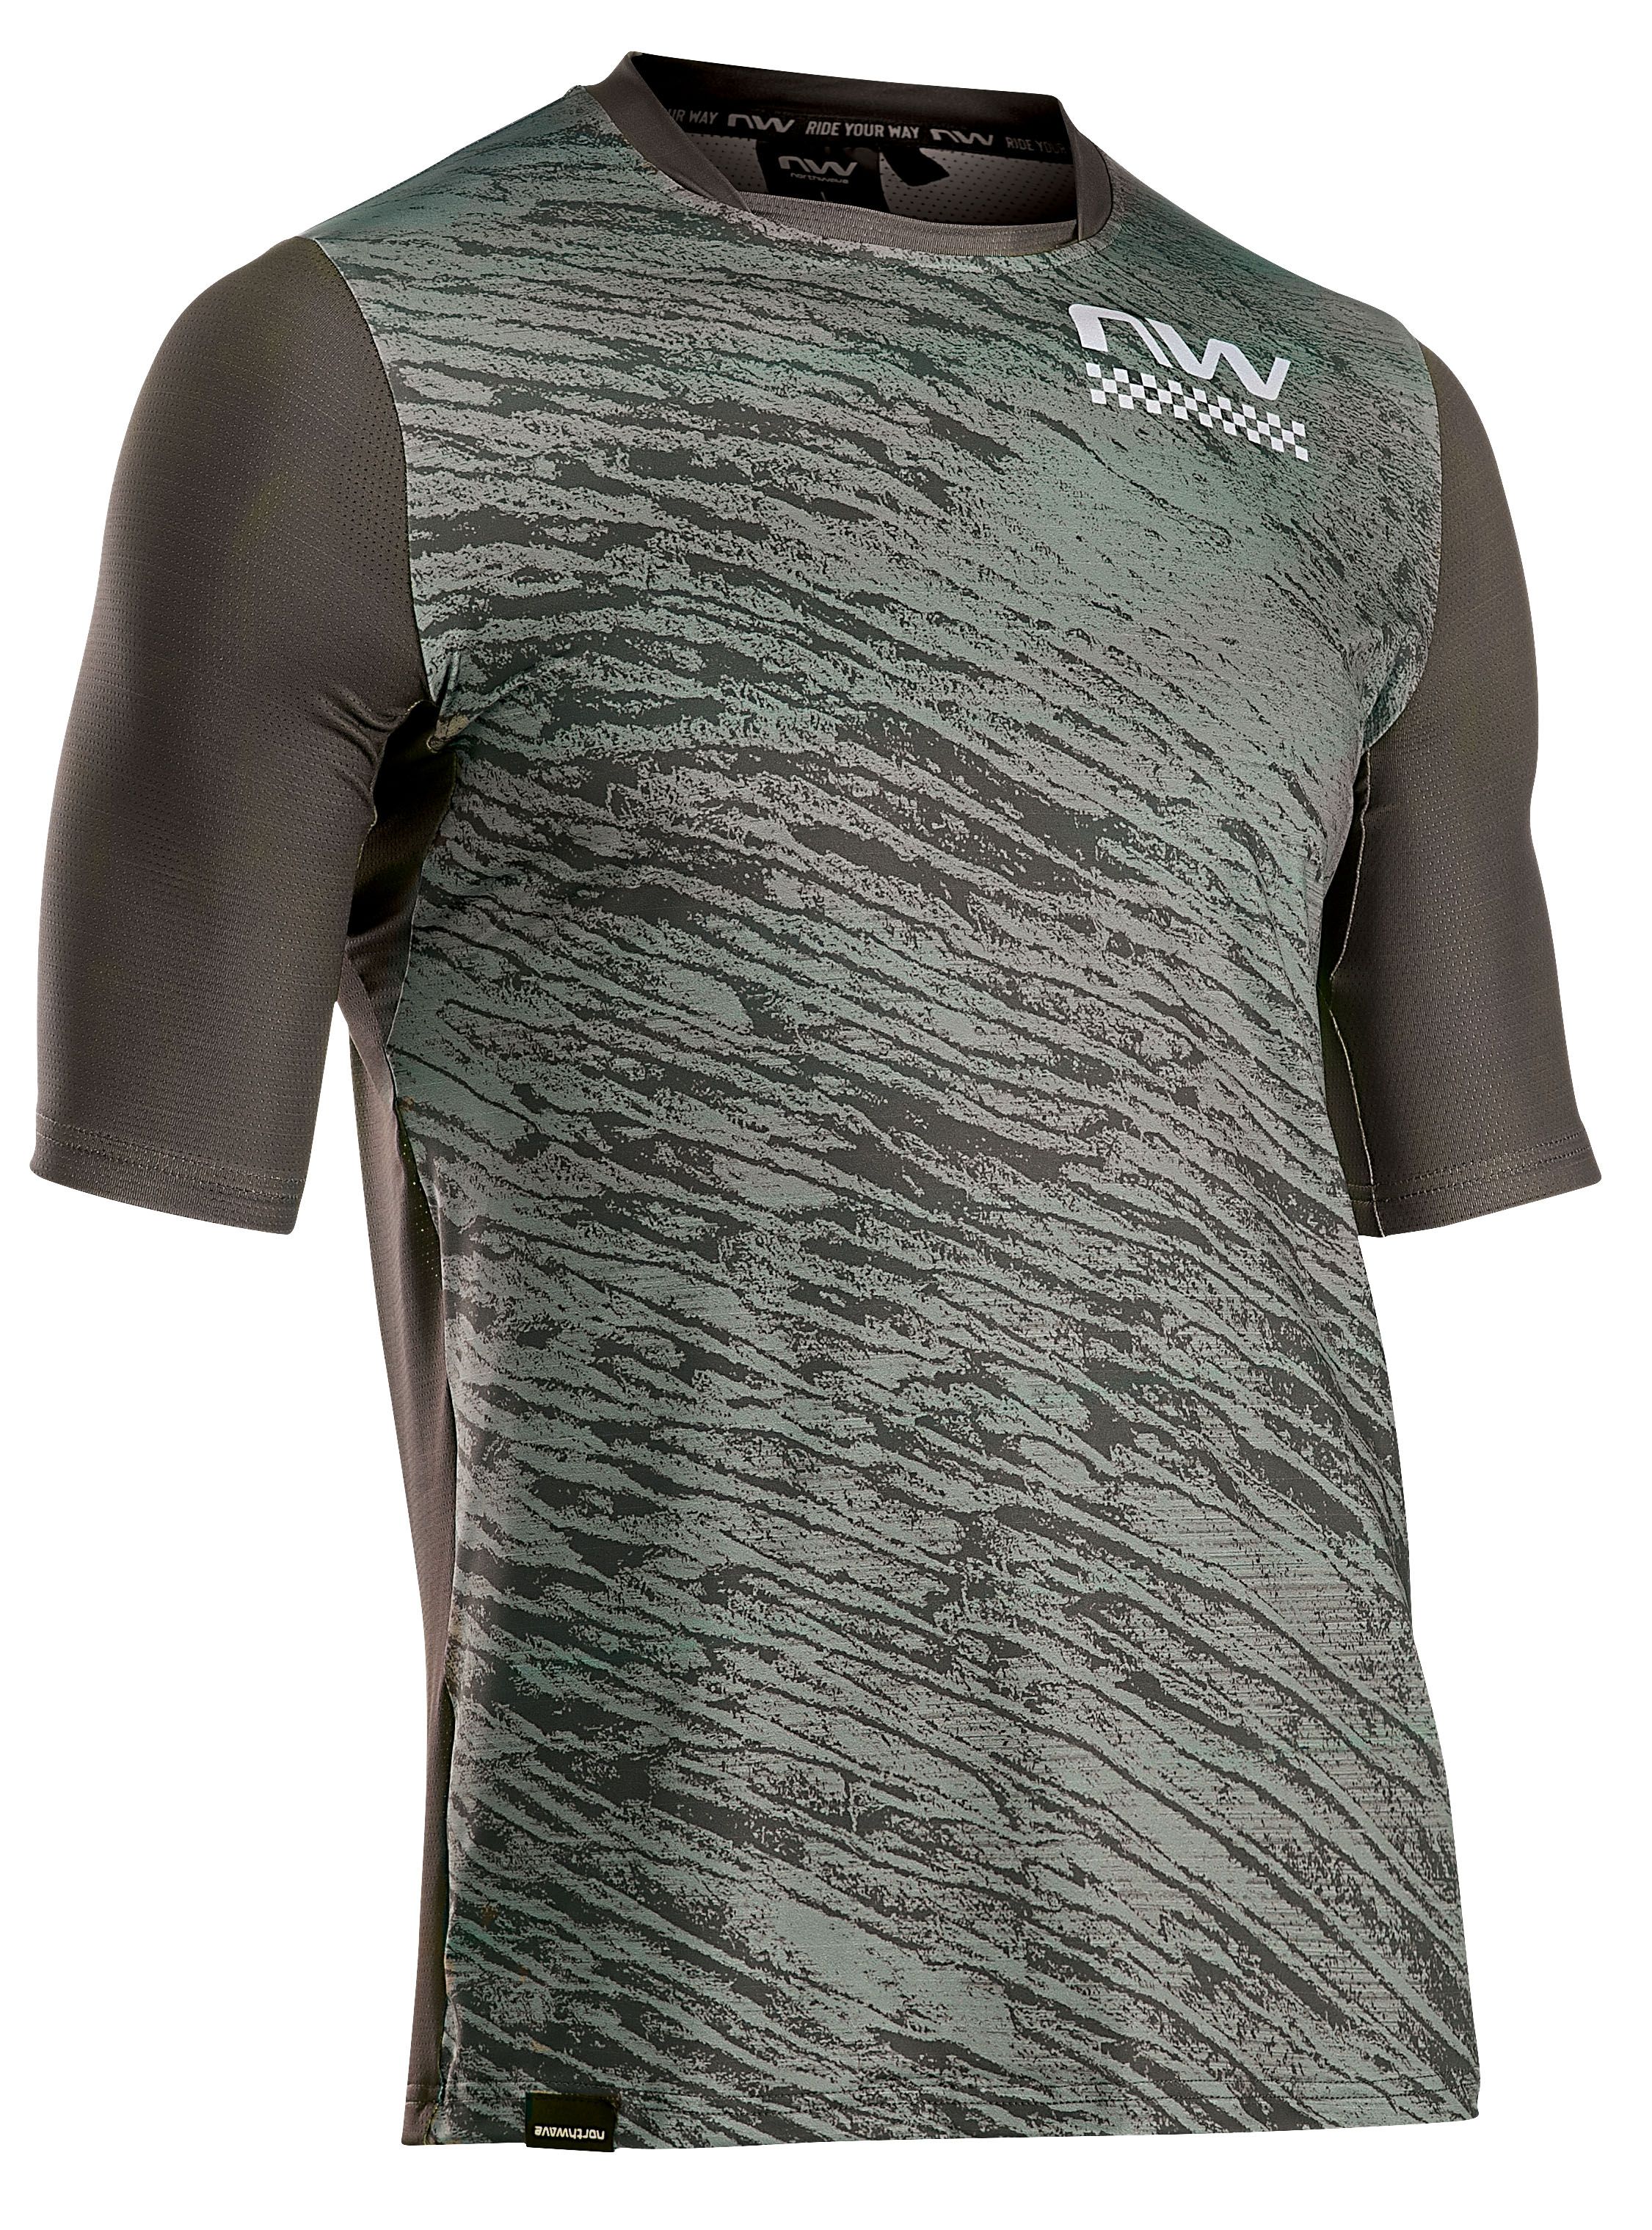 Northwave Bomb Jersey Short Sleeve, green forest/grey